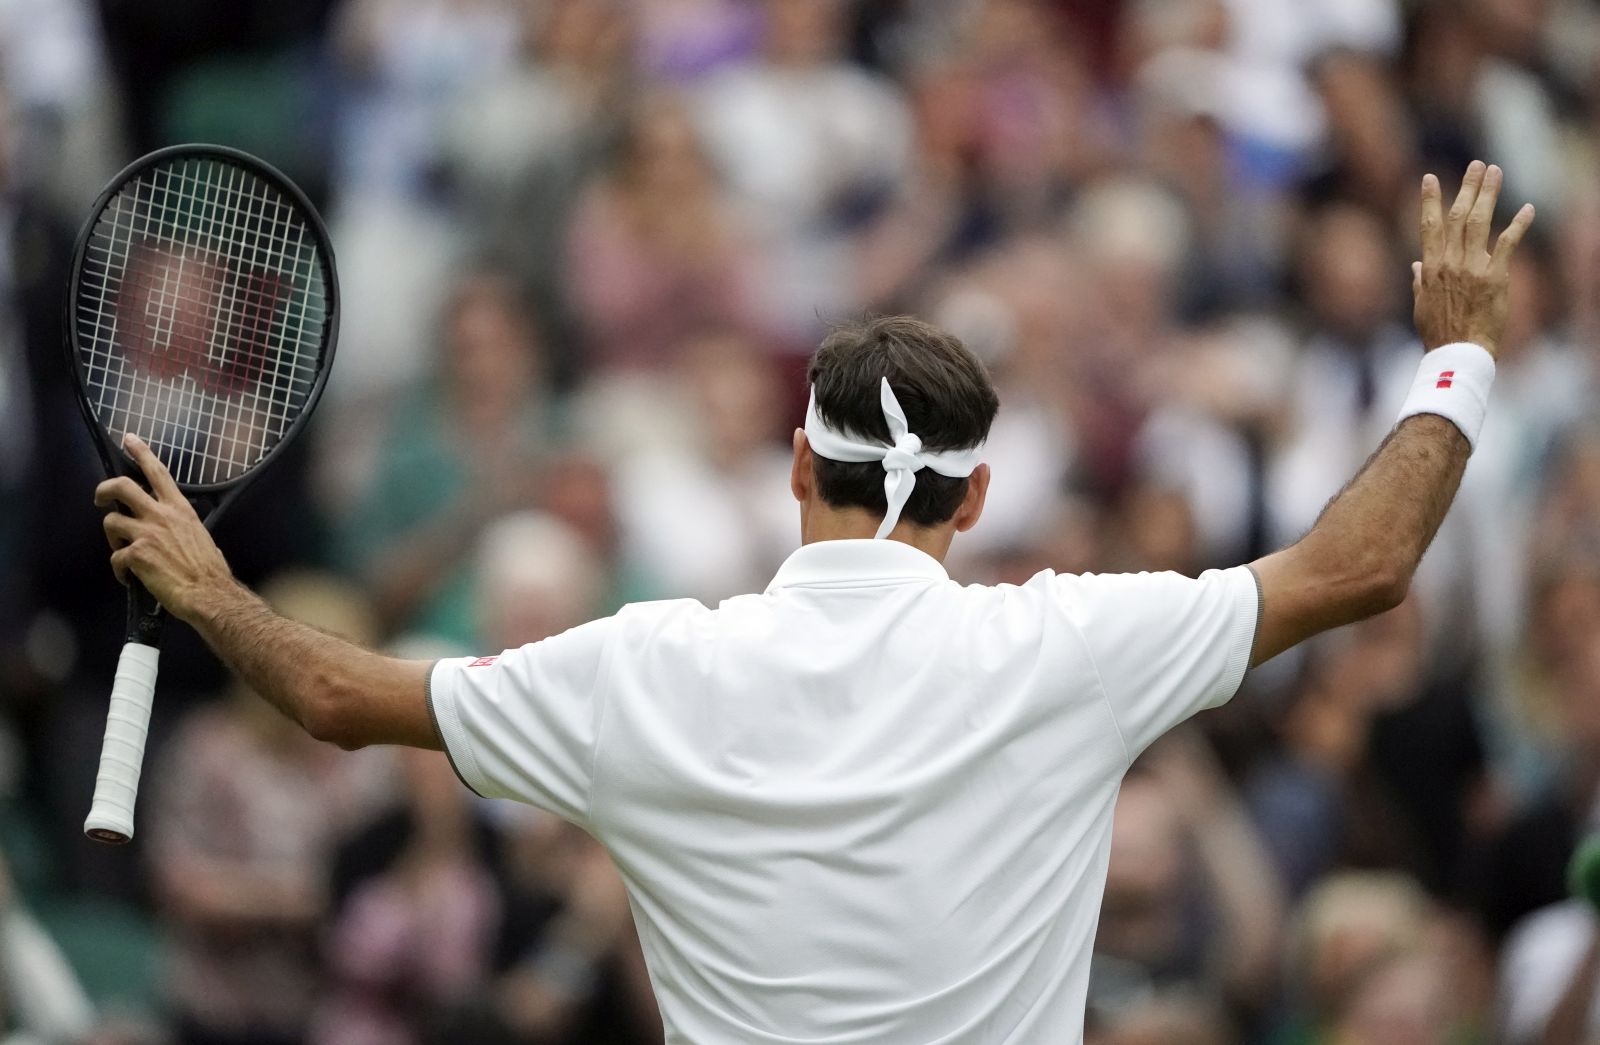 epa10185732 (FILE) - Roger Federer of Switzerland celebrates his win over Matteo Berrettini of Italy in their fourth round match during the Wimbledon Championships at the All England Lawn Tennis Club, in London, Britain, 08 July 2019 (reissued 15 September 2022). Federer on 15 September 2022 released a statement reading that the Laver Cup held on 23-25 September in London will be his final ATP event to compete in.  EPA/NIC BOTHMA EDITORIAL USE ONLY/NO COMMERCIAL SALES *** Local Caption *** 55623083